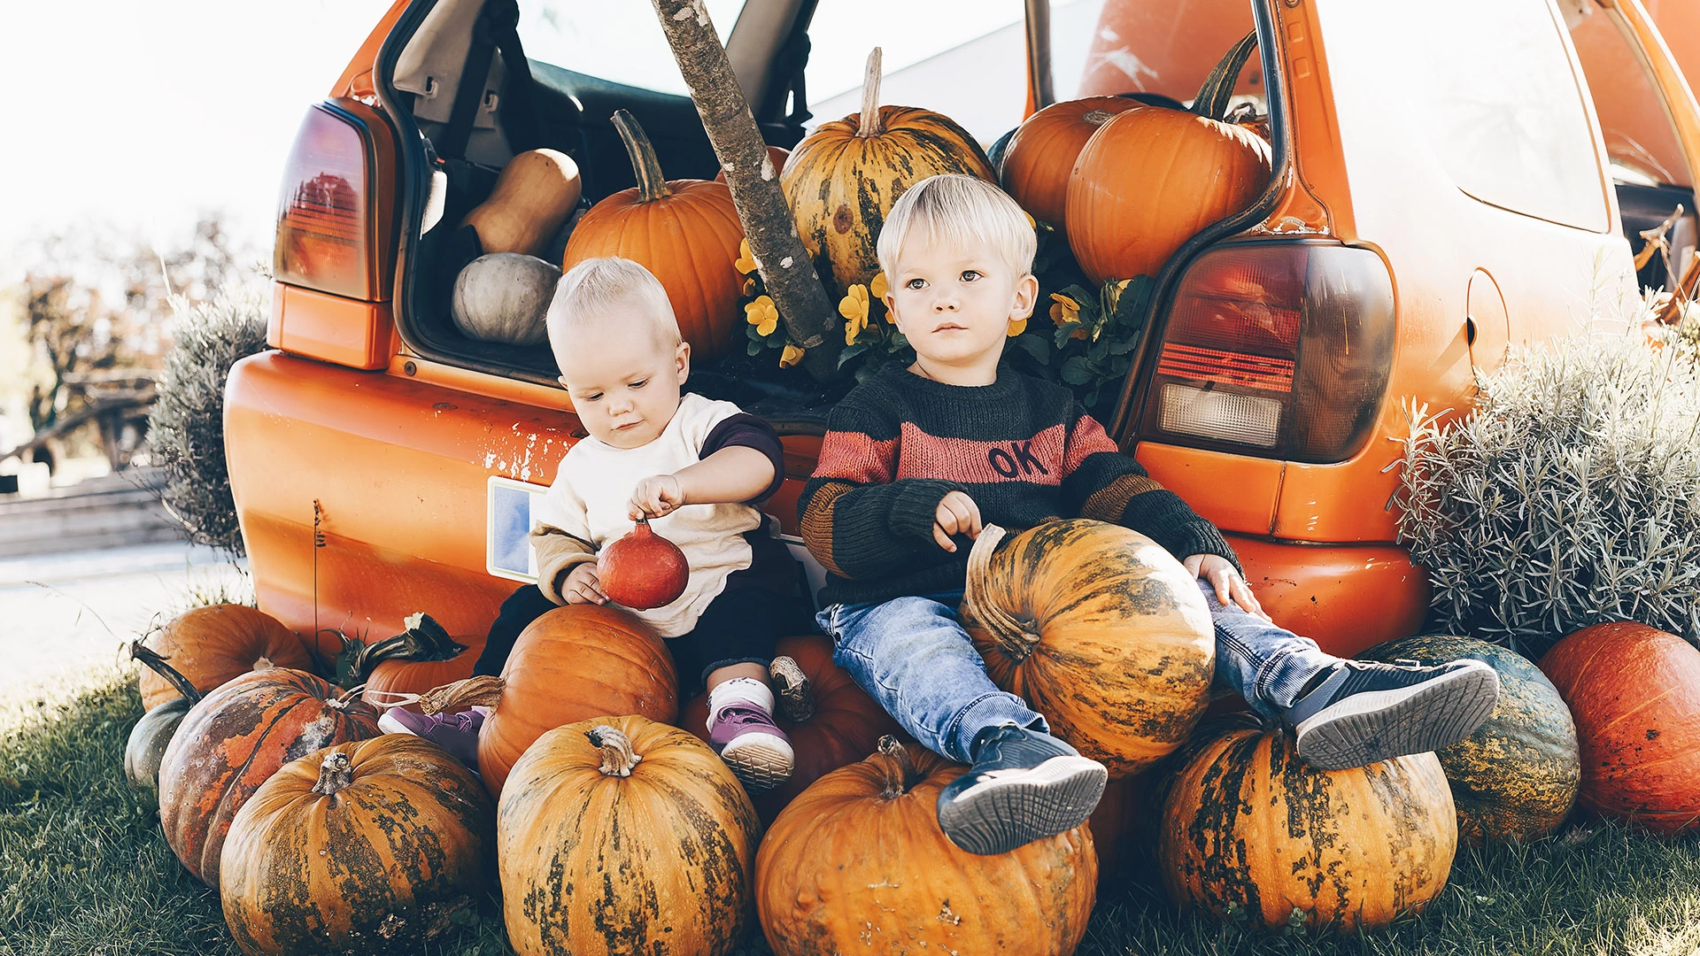 thanksgiving south florida car accident law firm_0000s_0001_kids-at-pumpkin-patch-halloween-and-thanksgiving-2022-10-06-